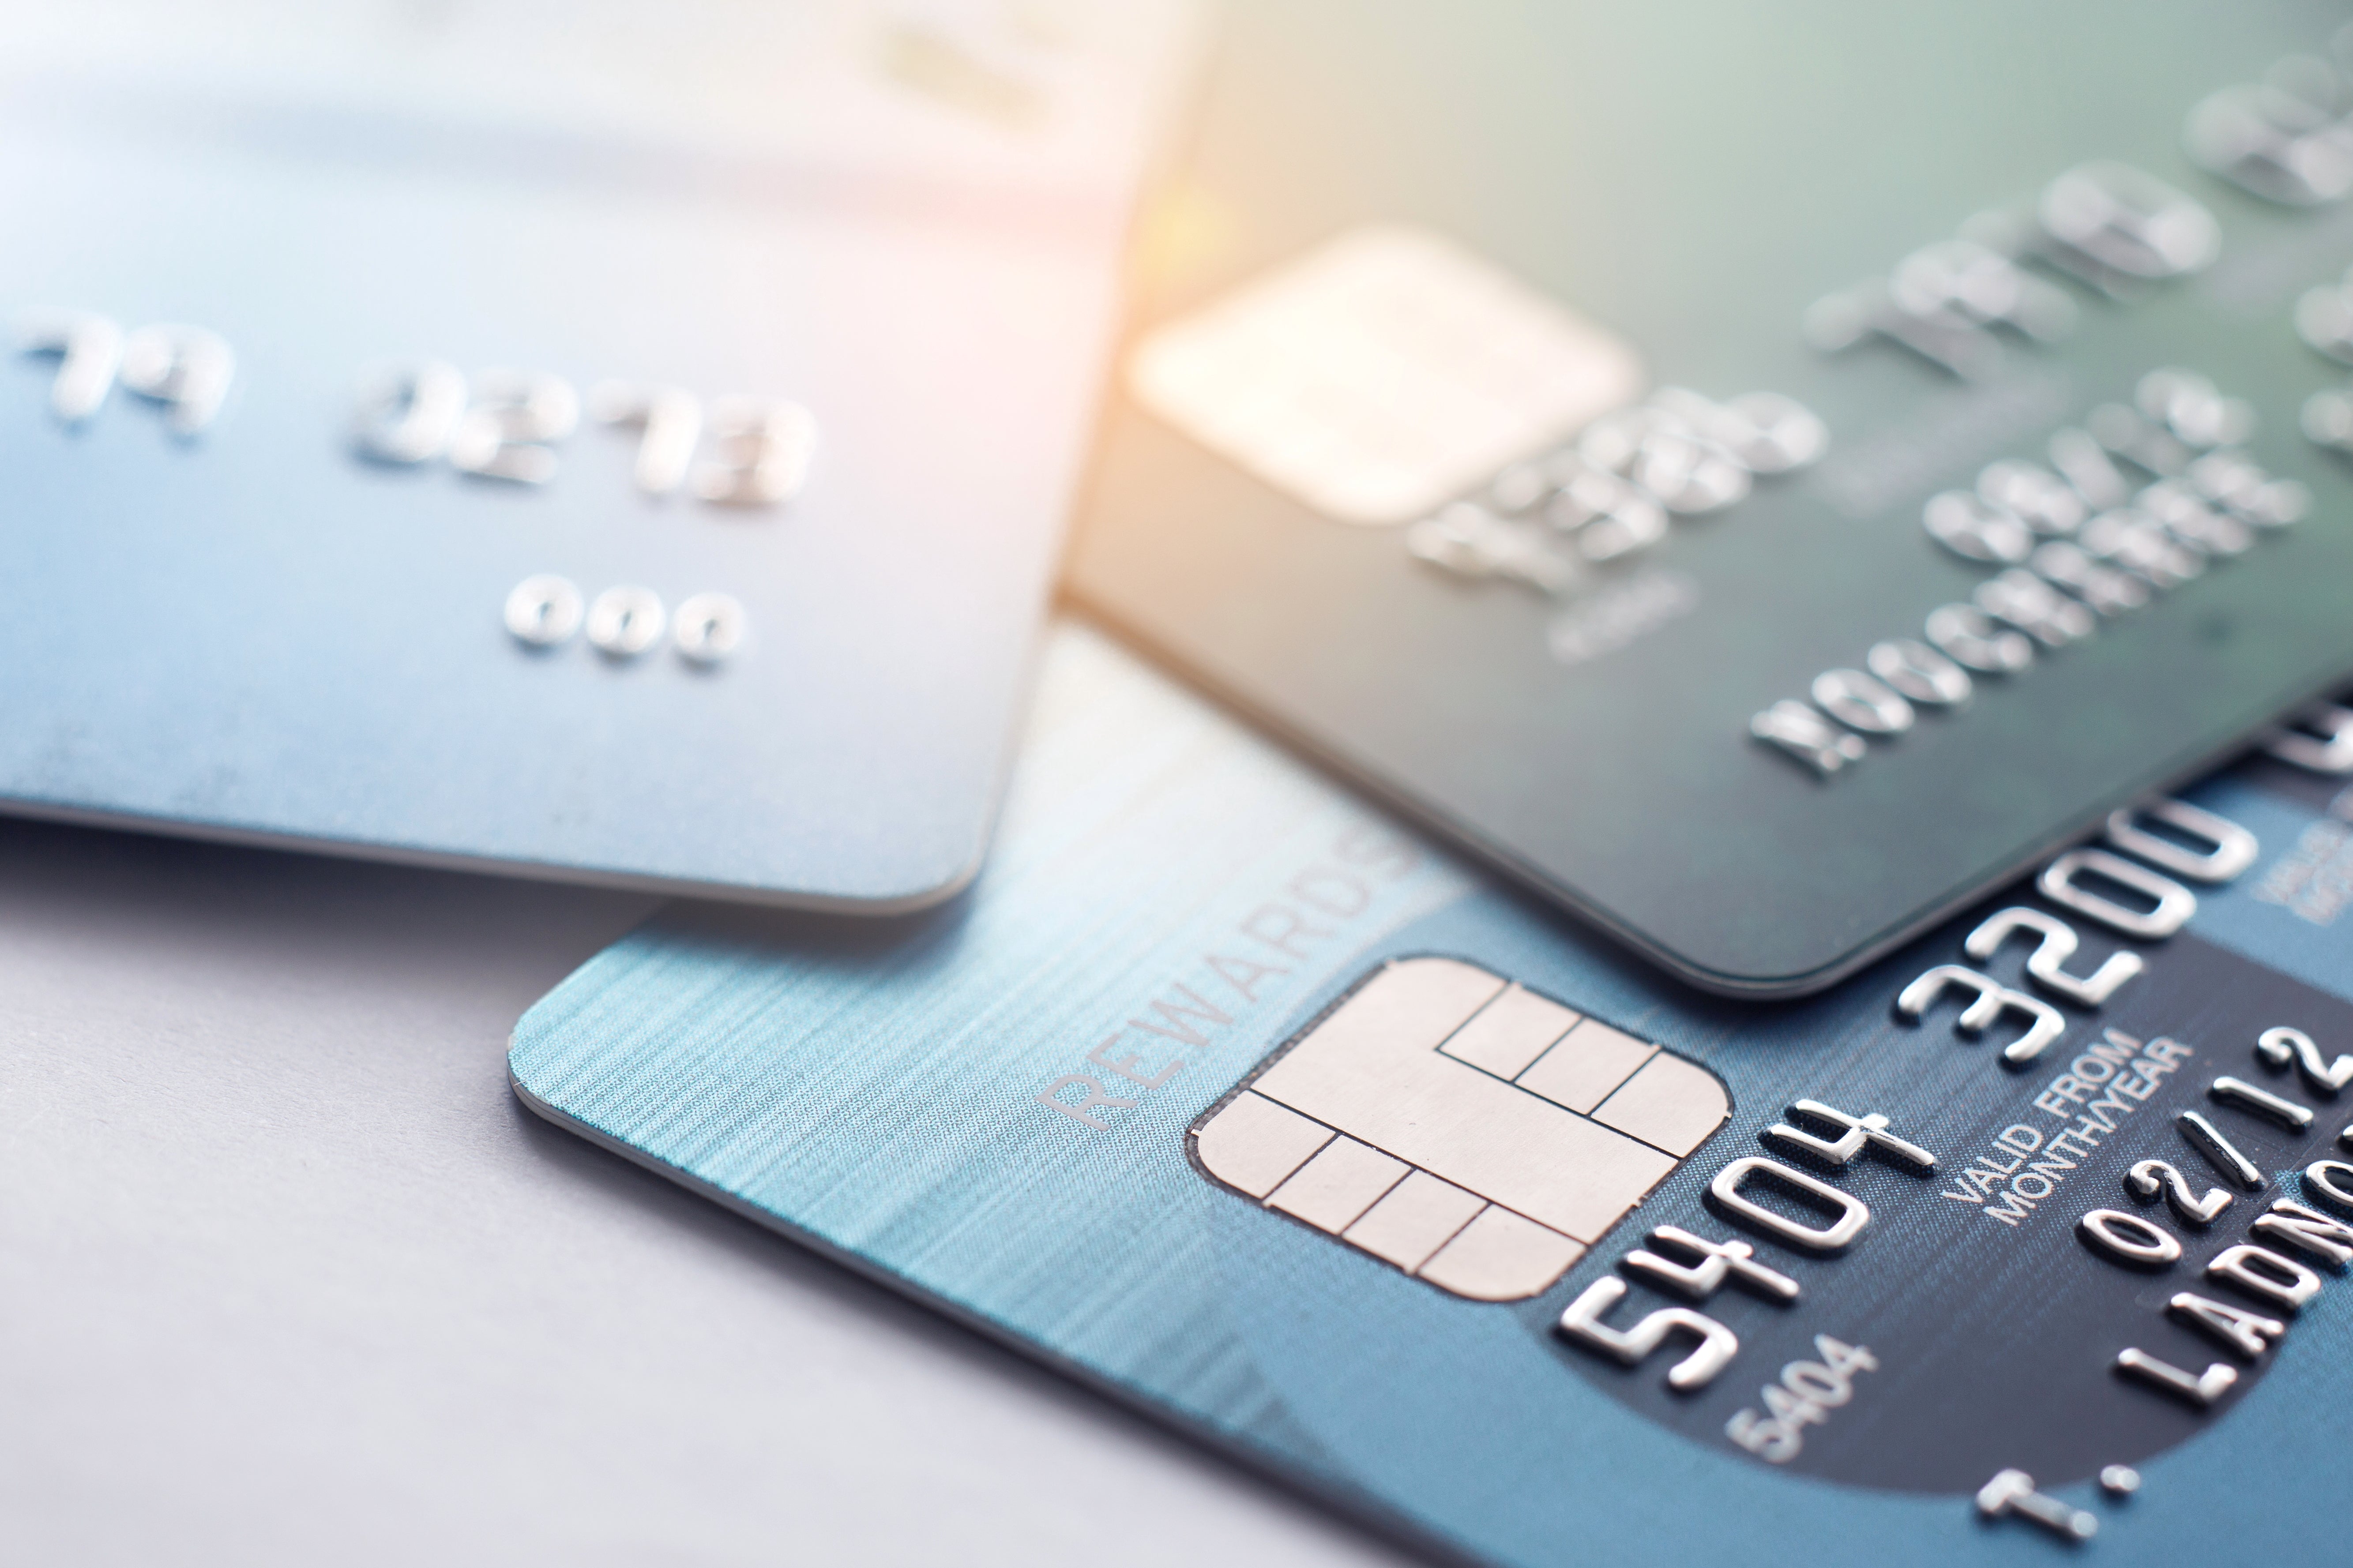 Image of Wondering how many credit cards you should have? Here are the pros and cons of having multiple credit cards and how that could affect your finances.